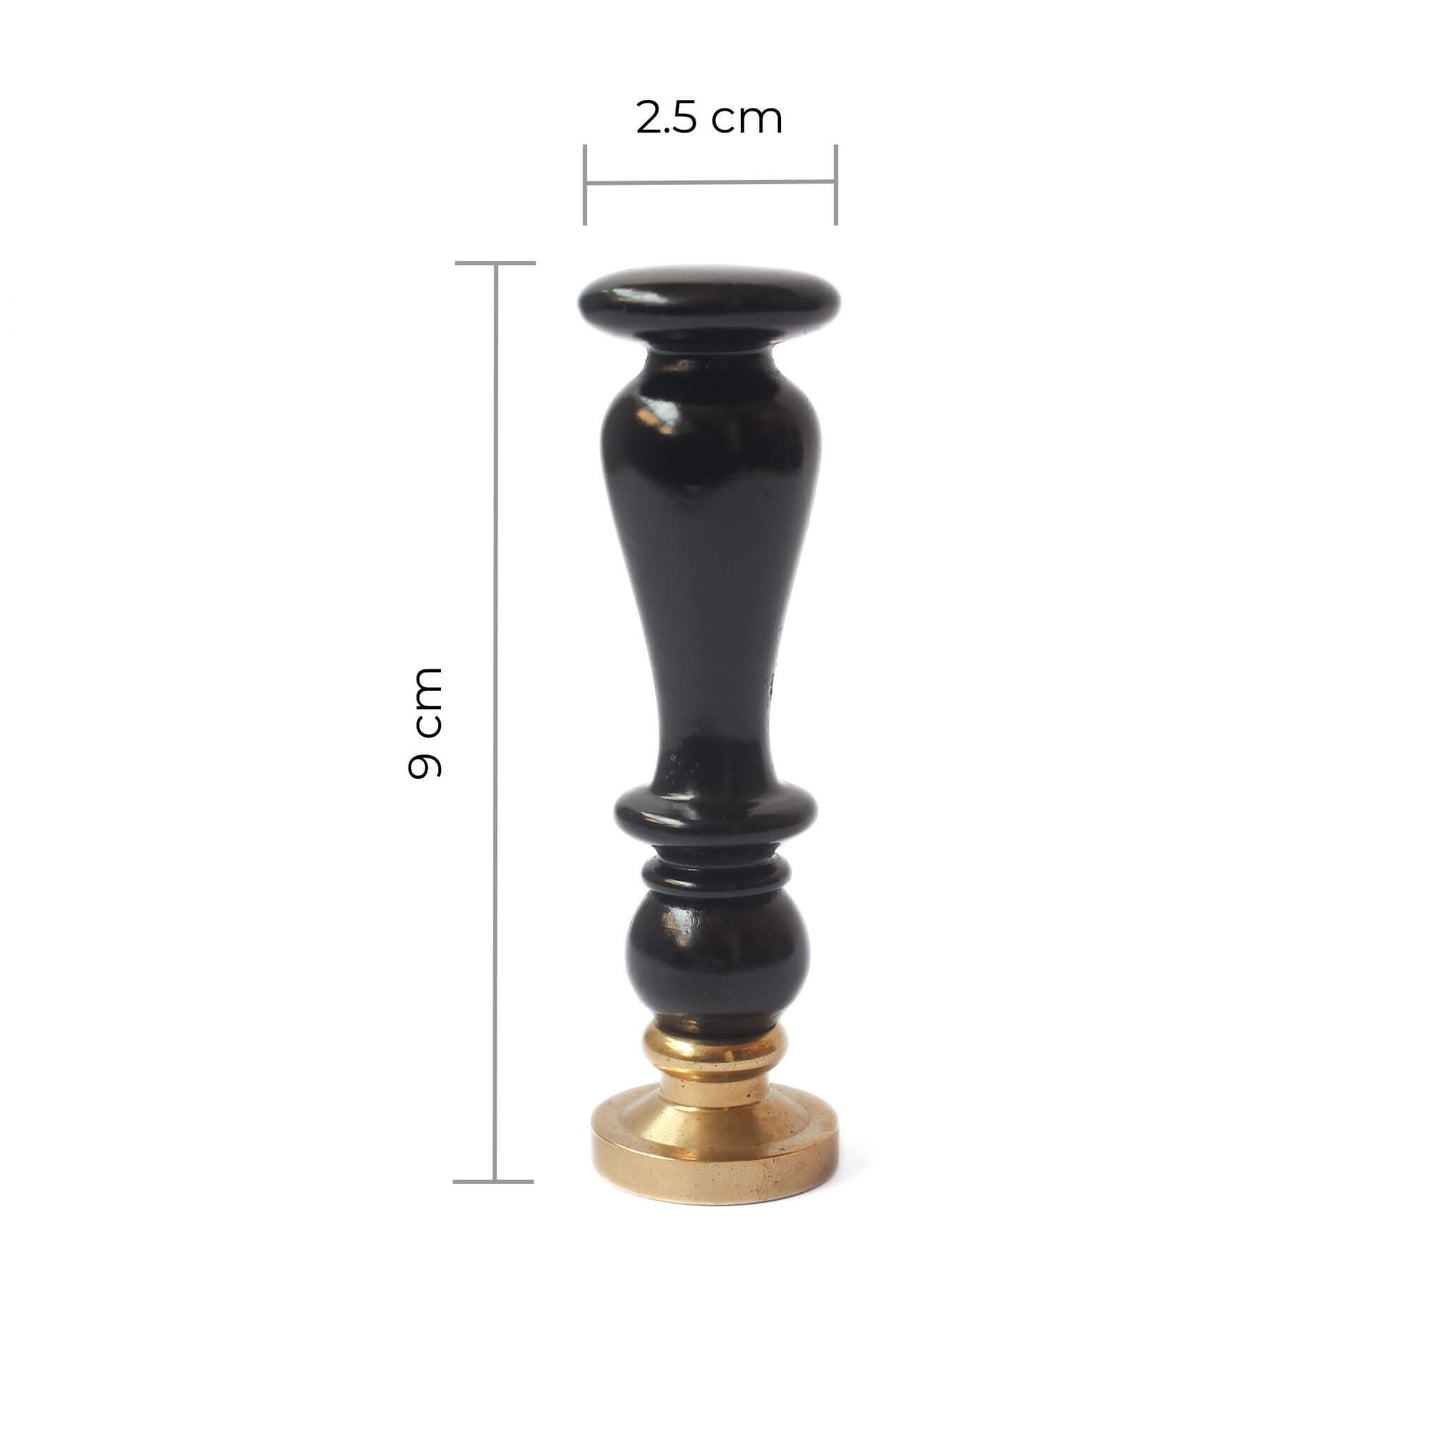 Peony wax seal brass head with black wooden handle